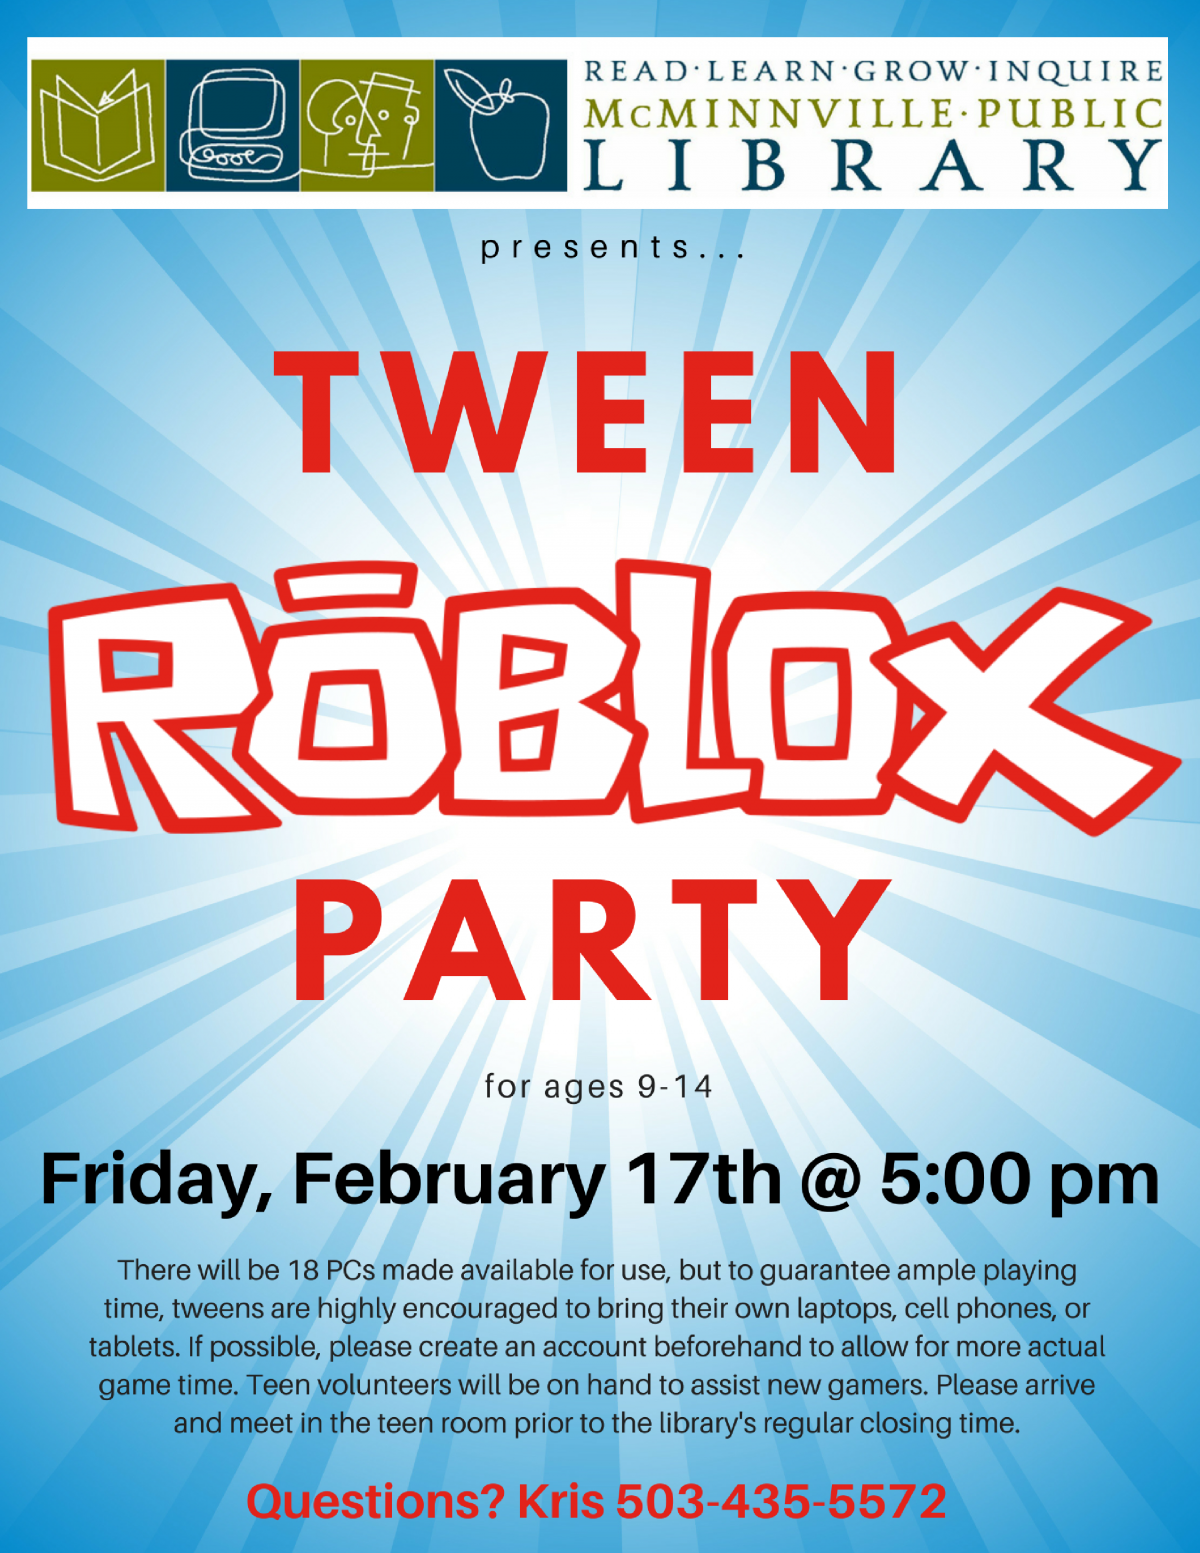 Tween Party Roblox Mcminnville Oregon - department of public works roblox